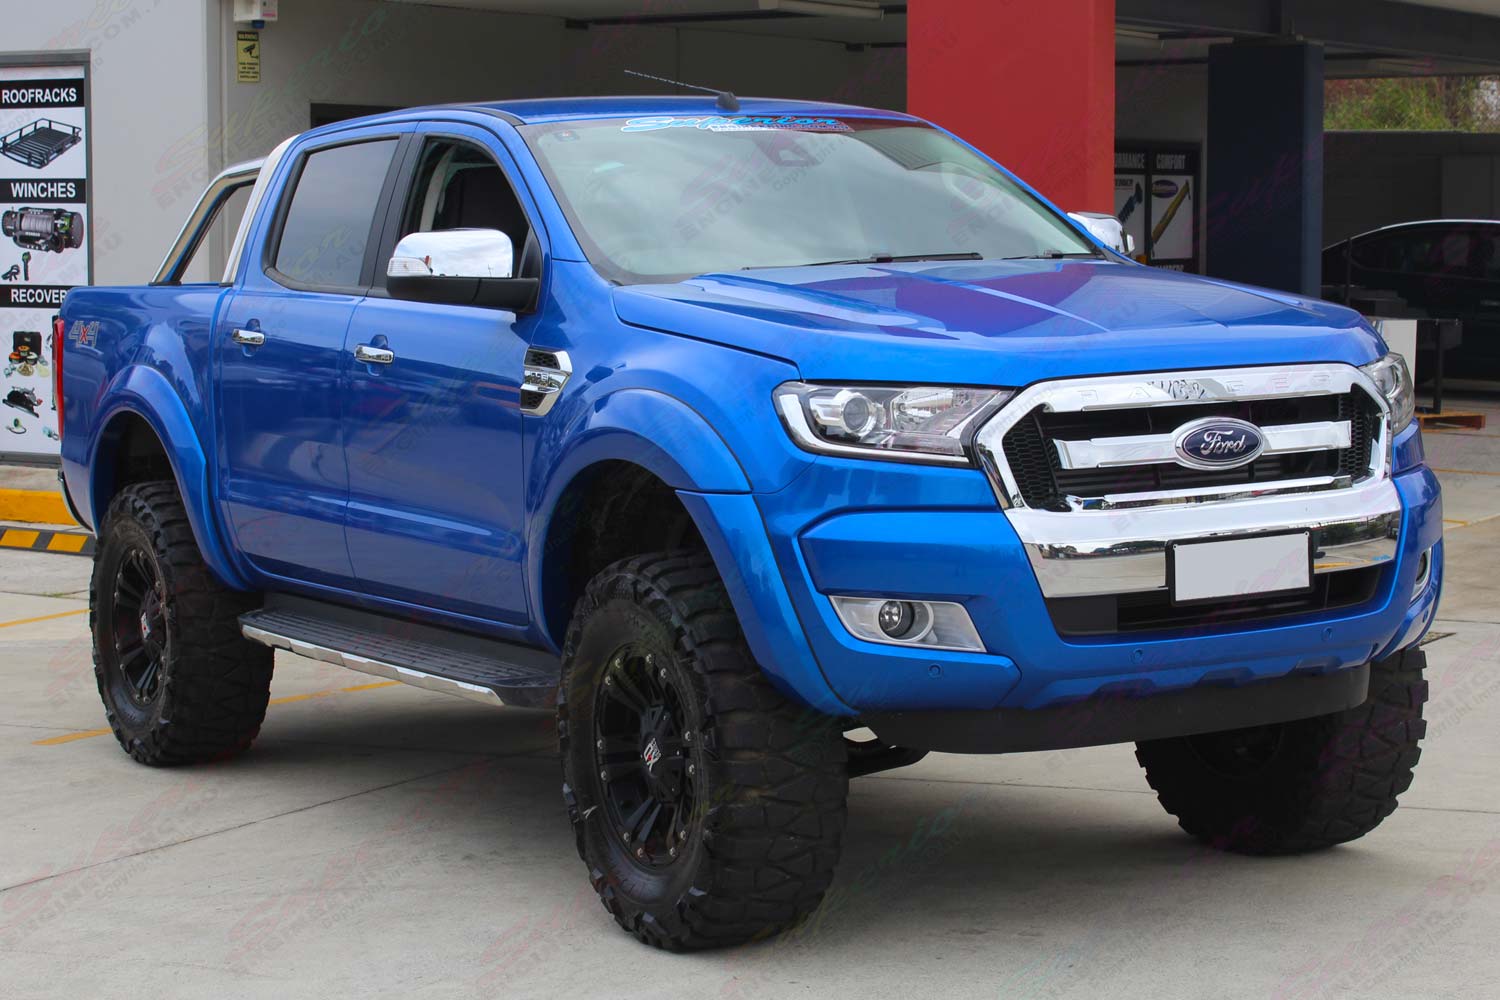 Front right view of the Ford Ranger (Dual Cab)